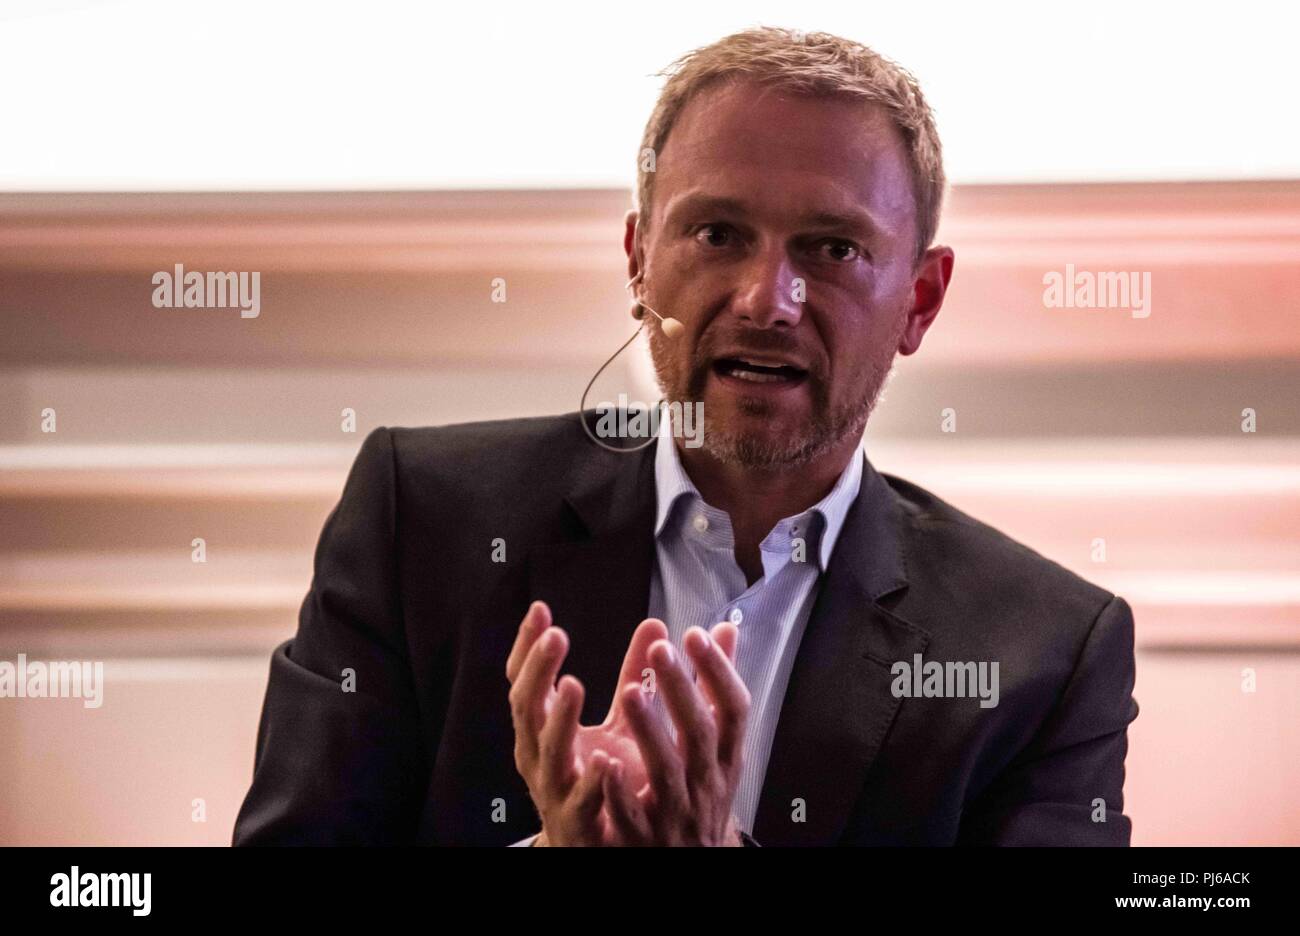 Munich, Bavaria, Germany. 4th Sep, 2018. CHRISTIAN LINDNER, the head of Germany's center-right FDP party (Freie Demokratische Partei, Free Democrats) made an appearance in Munich. As head of the FDP, Lindner is also a member of the German Bundestag. It was due to his decision to decline the terms of creating a coalition with Angela Merkel after the 2017 national elections that left Germany without a government for months until it created another coalition with the SPD. Lindner and Dr Michael Haberland of Mobil Deutschland discussed news strategies for mobility and infrastructure. A Stock Photo